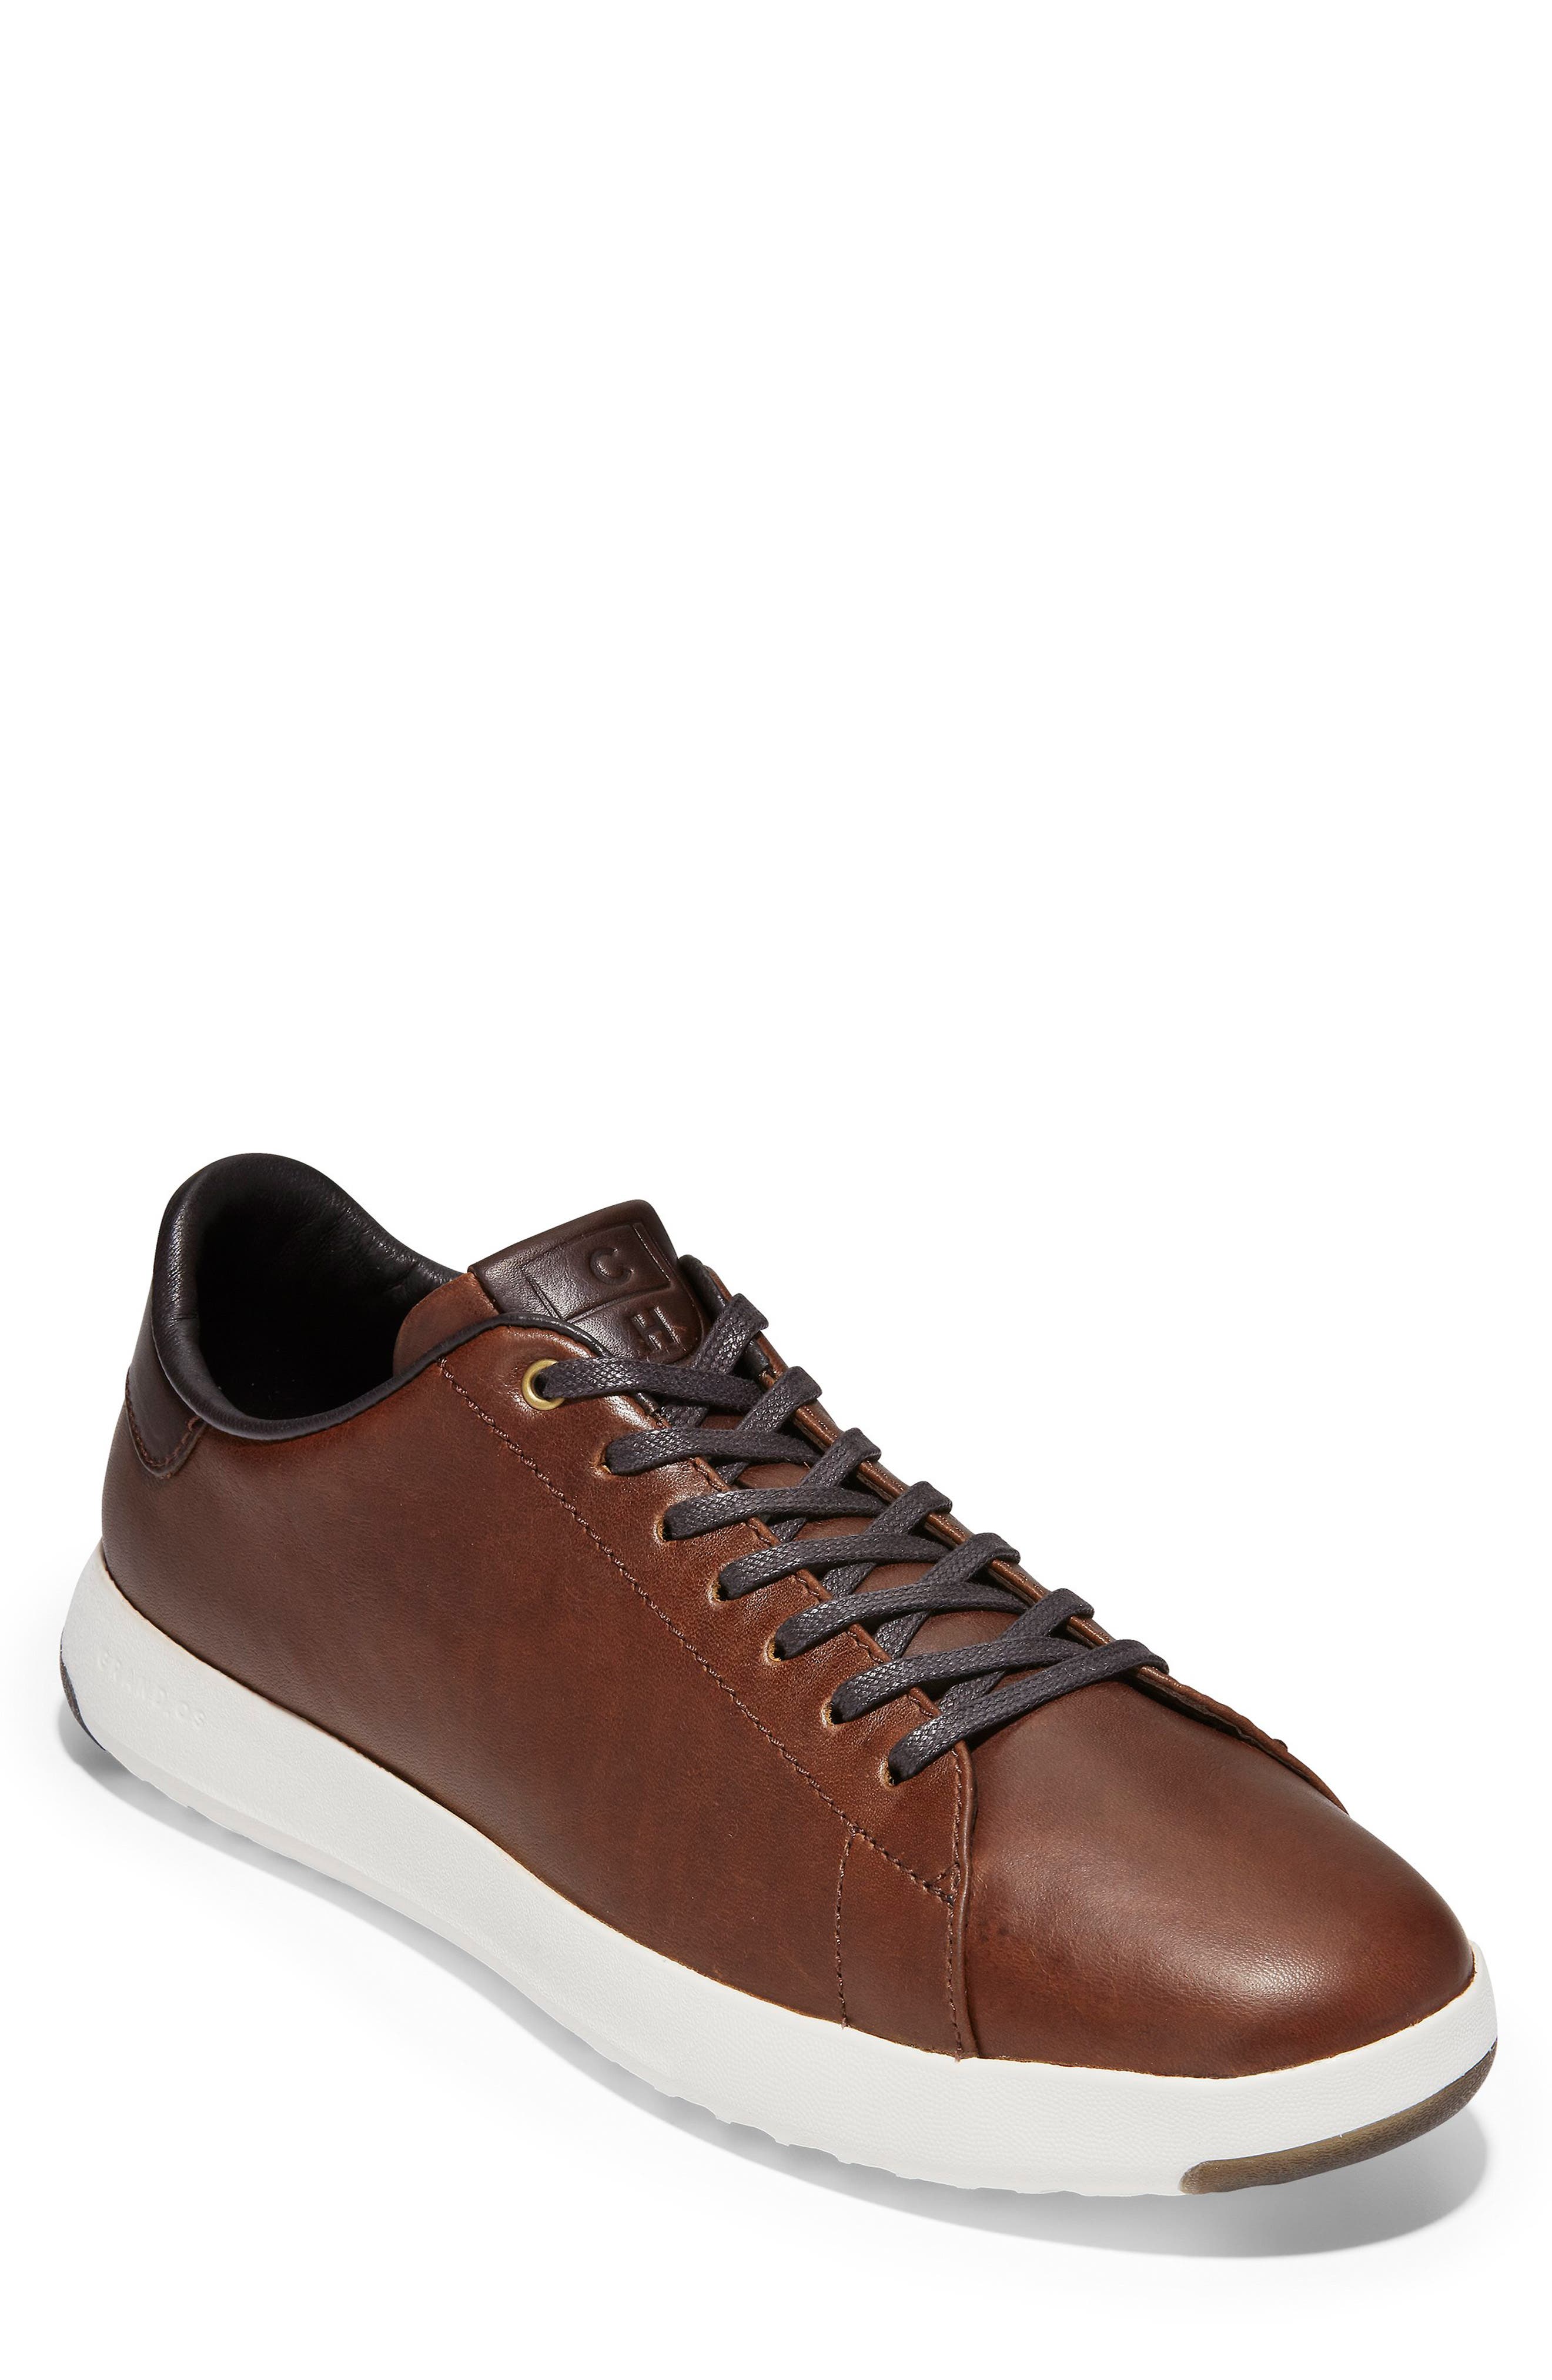 nordstrom cole haan mens shoes